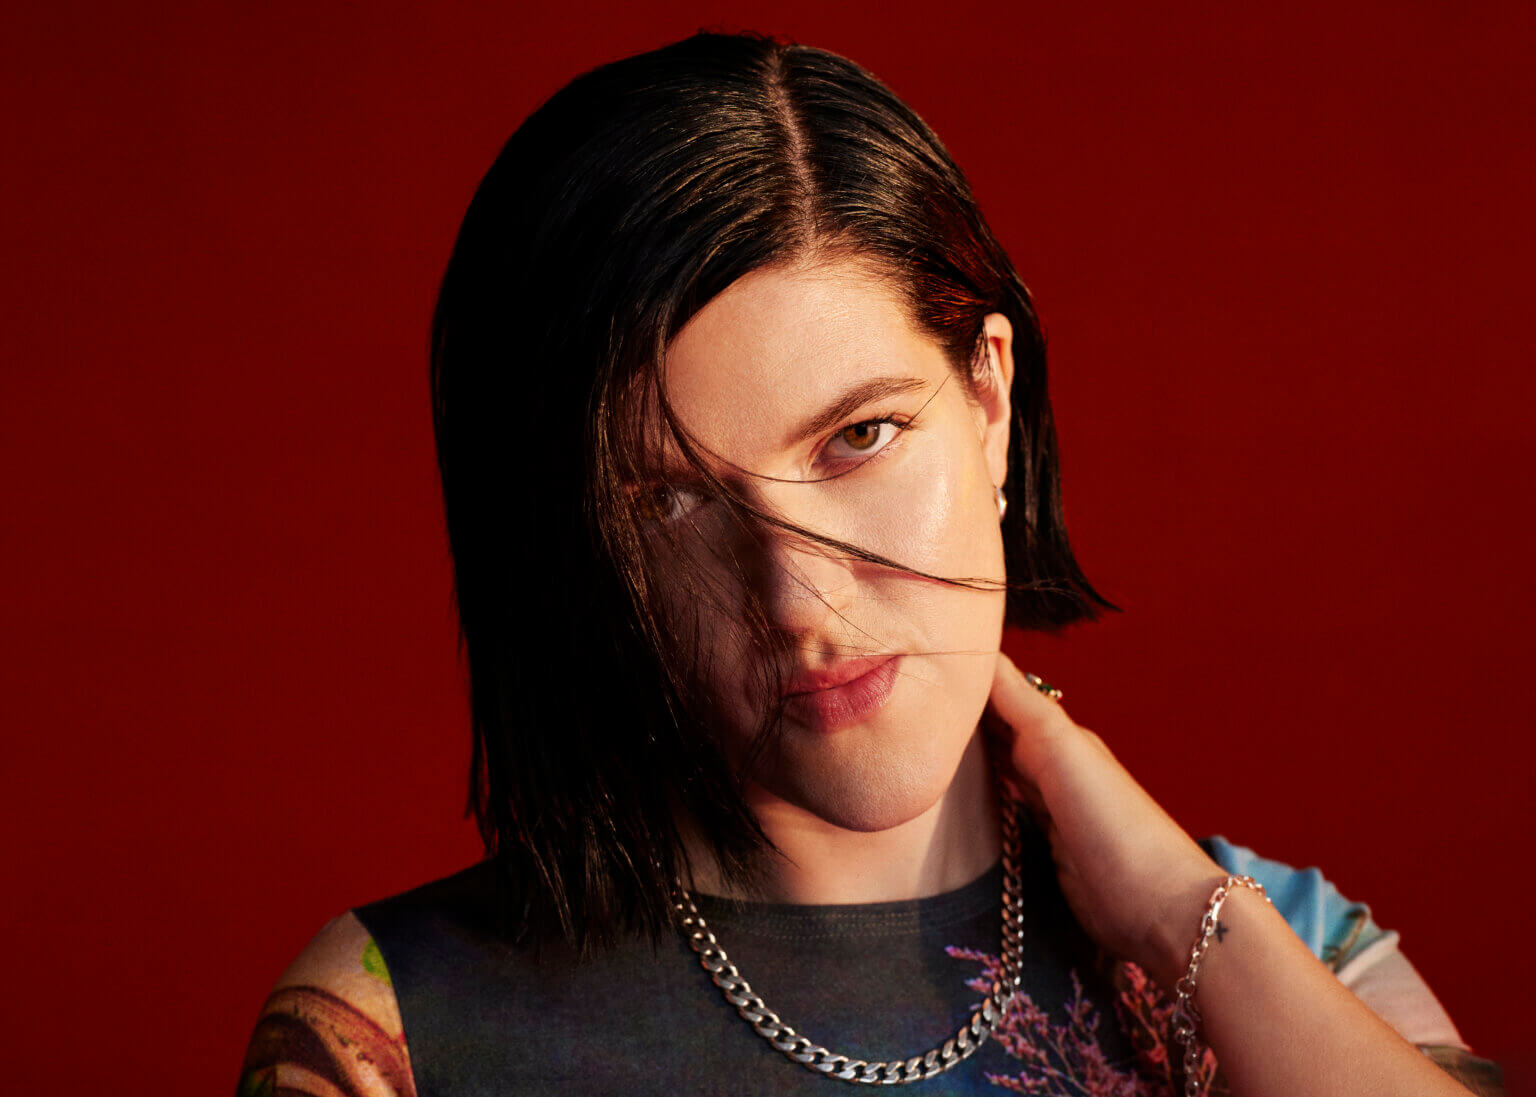 Romy of The xx, has shared a new single, “Strong” featuring Fred again, alongside a video directed by her wife, artist Vic Lentaigne